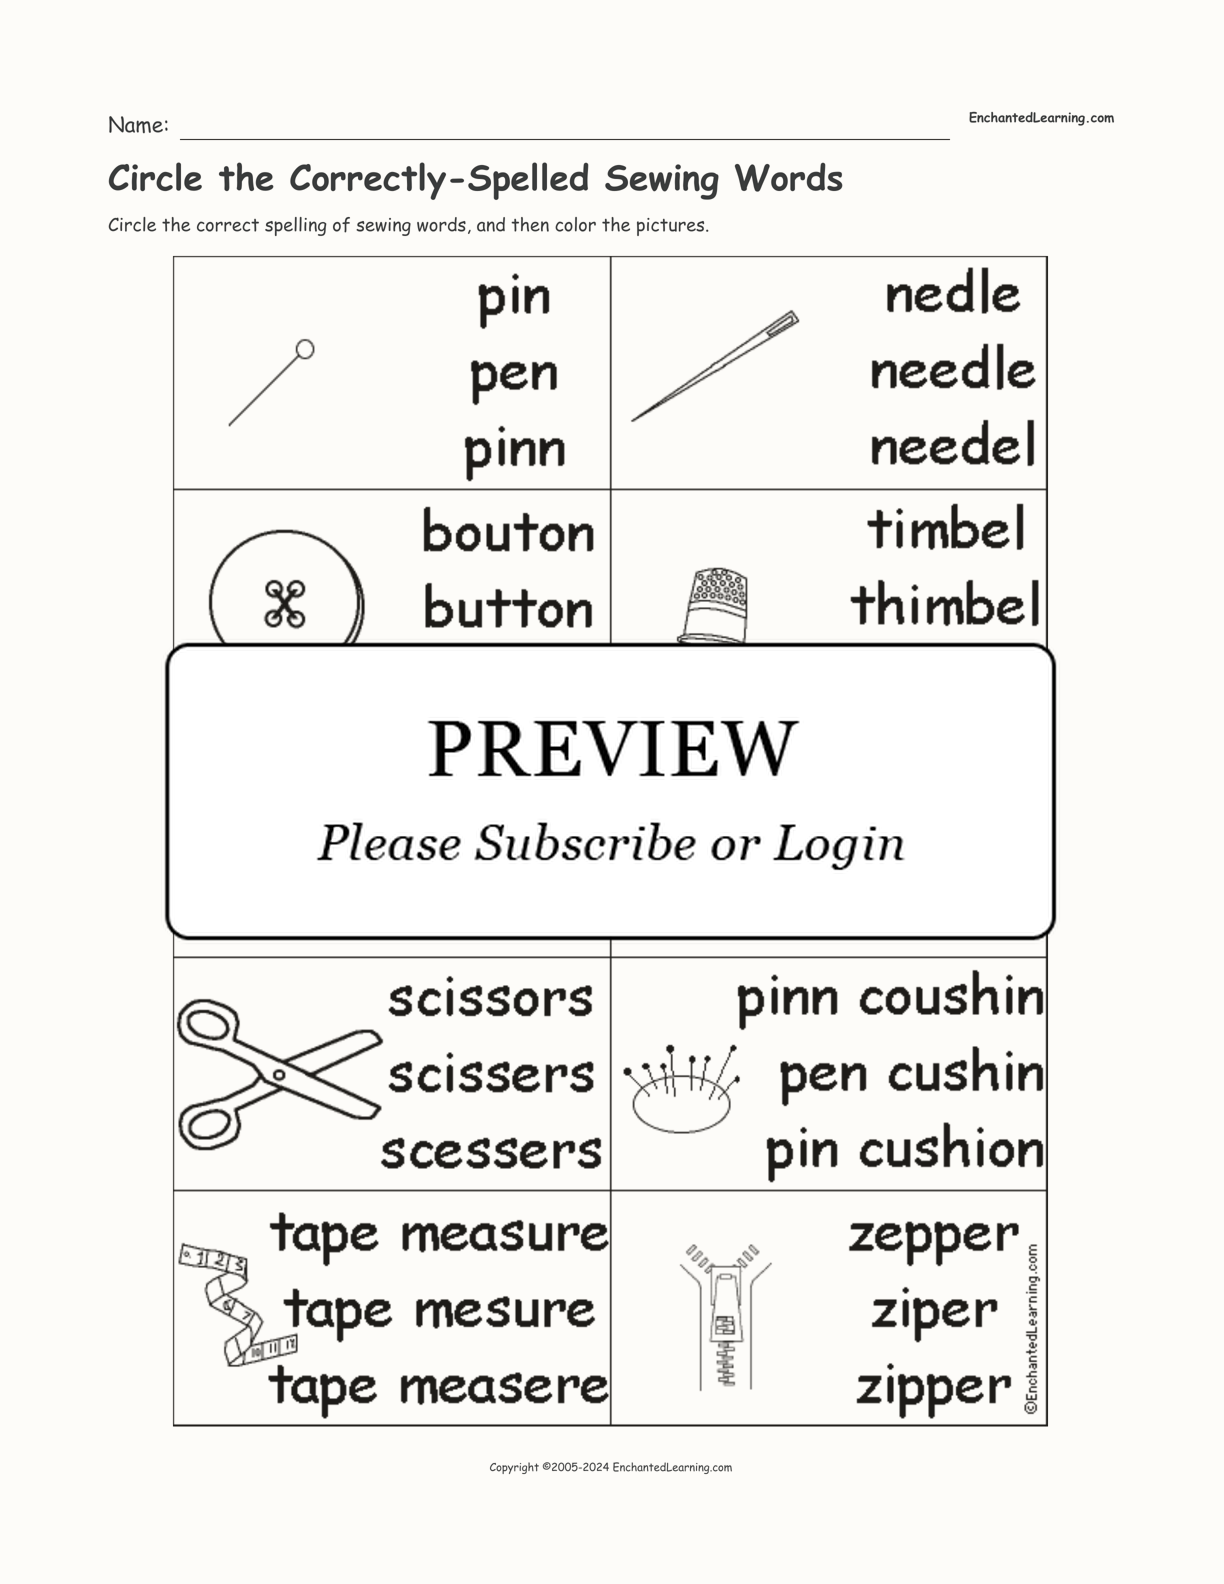 Circle the Correctly-Spelled Sewing Words interactive worksheet page 1